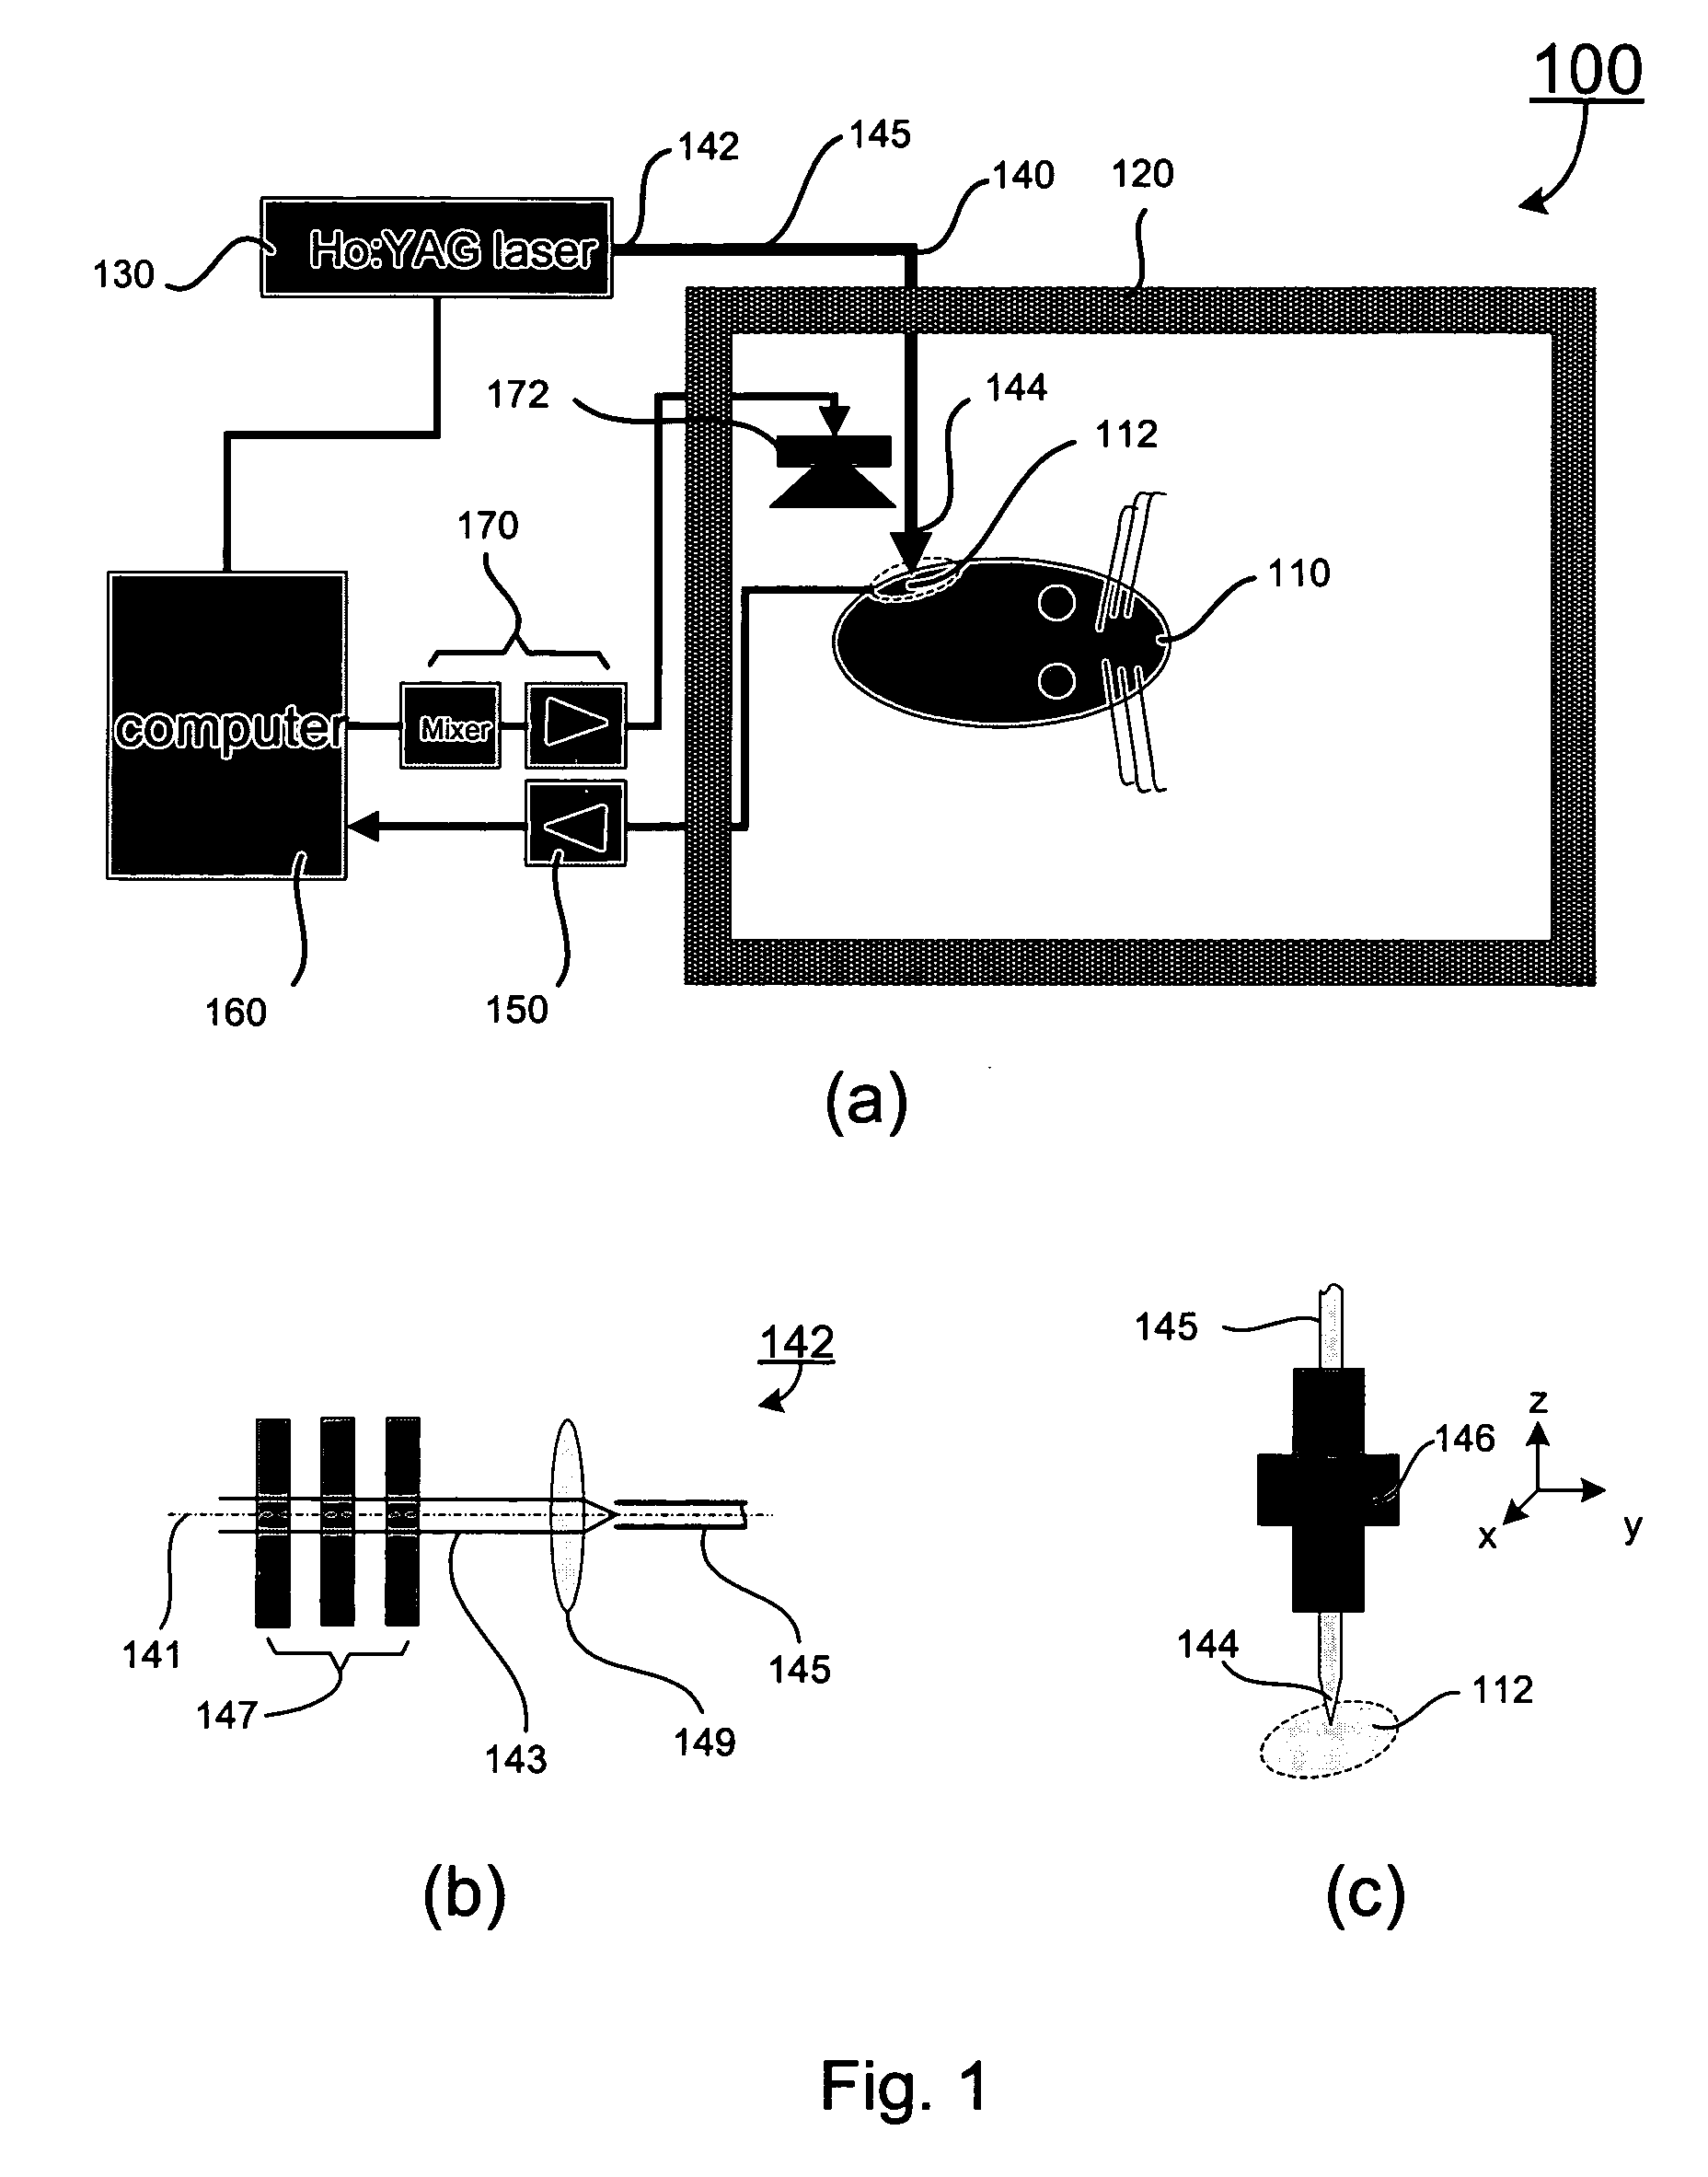 Apparatus and methods for optical stimulation of the auditory nerve